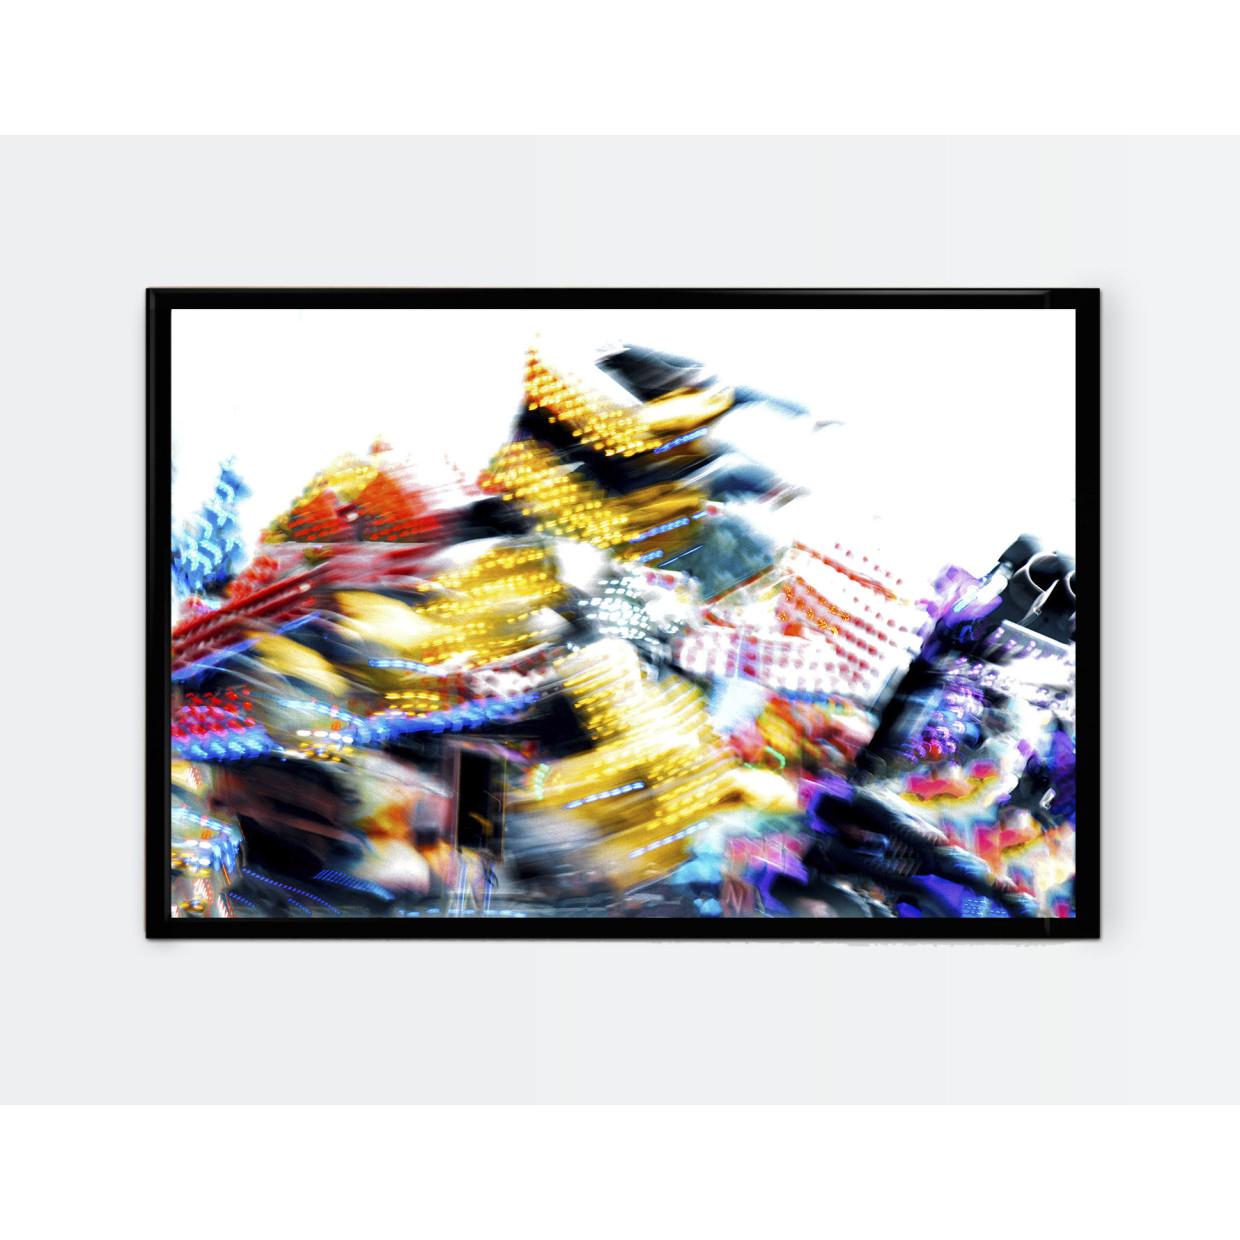  Fun Fair 02 - Fine Art Photography, Contemporary, Abstract, Art, Valentin Russo For Sale 1